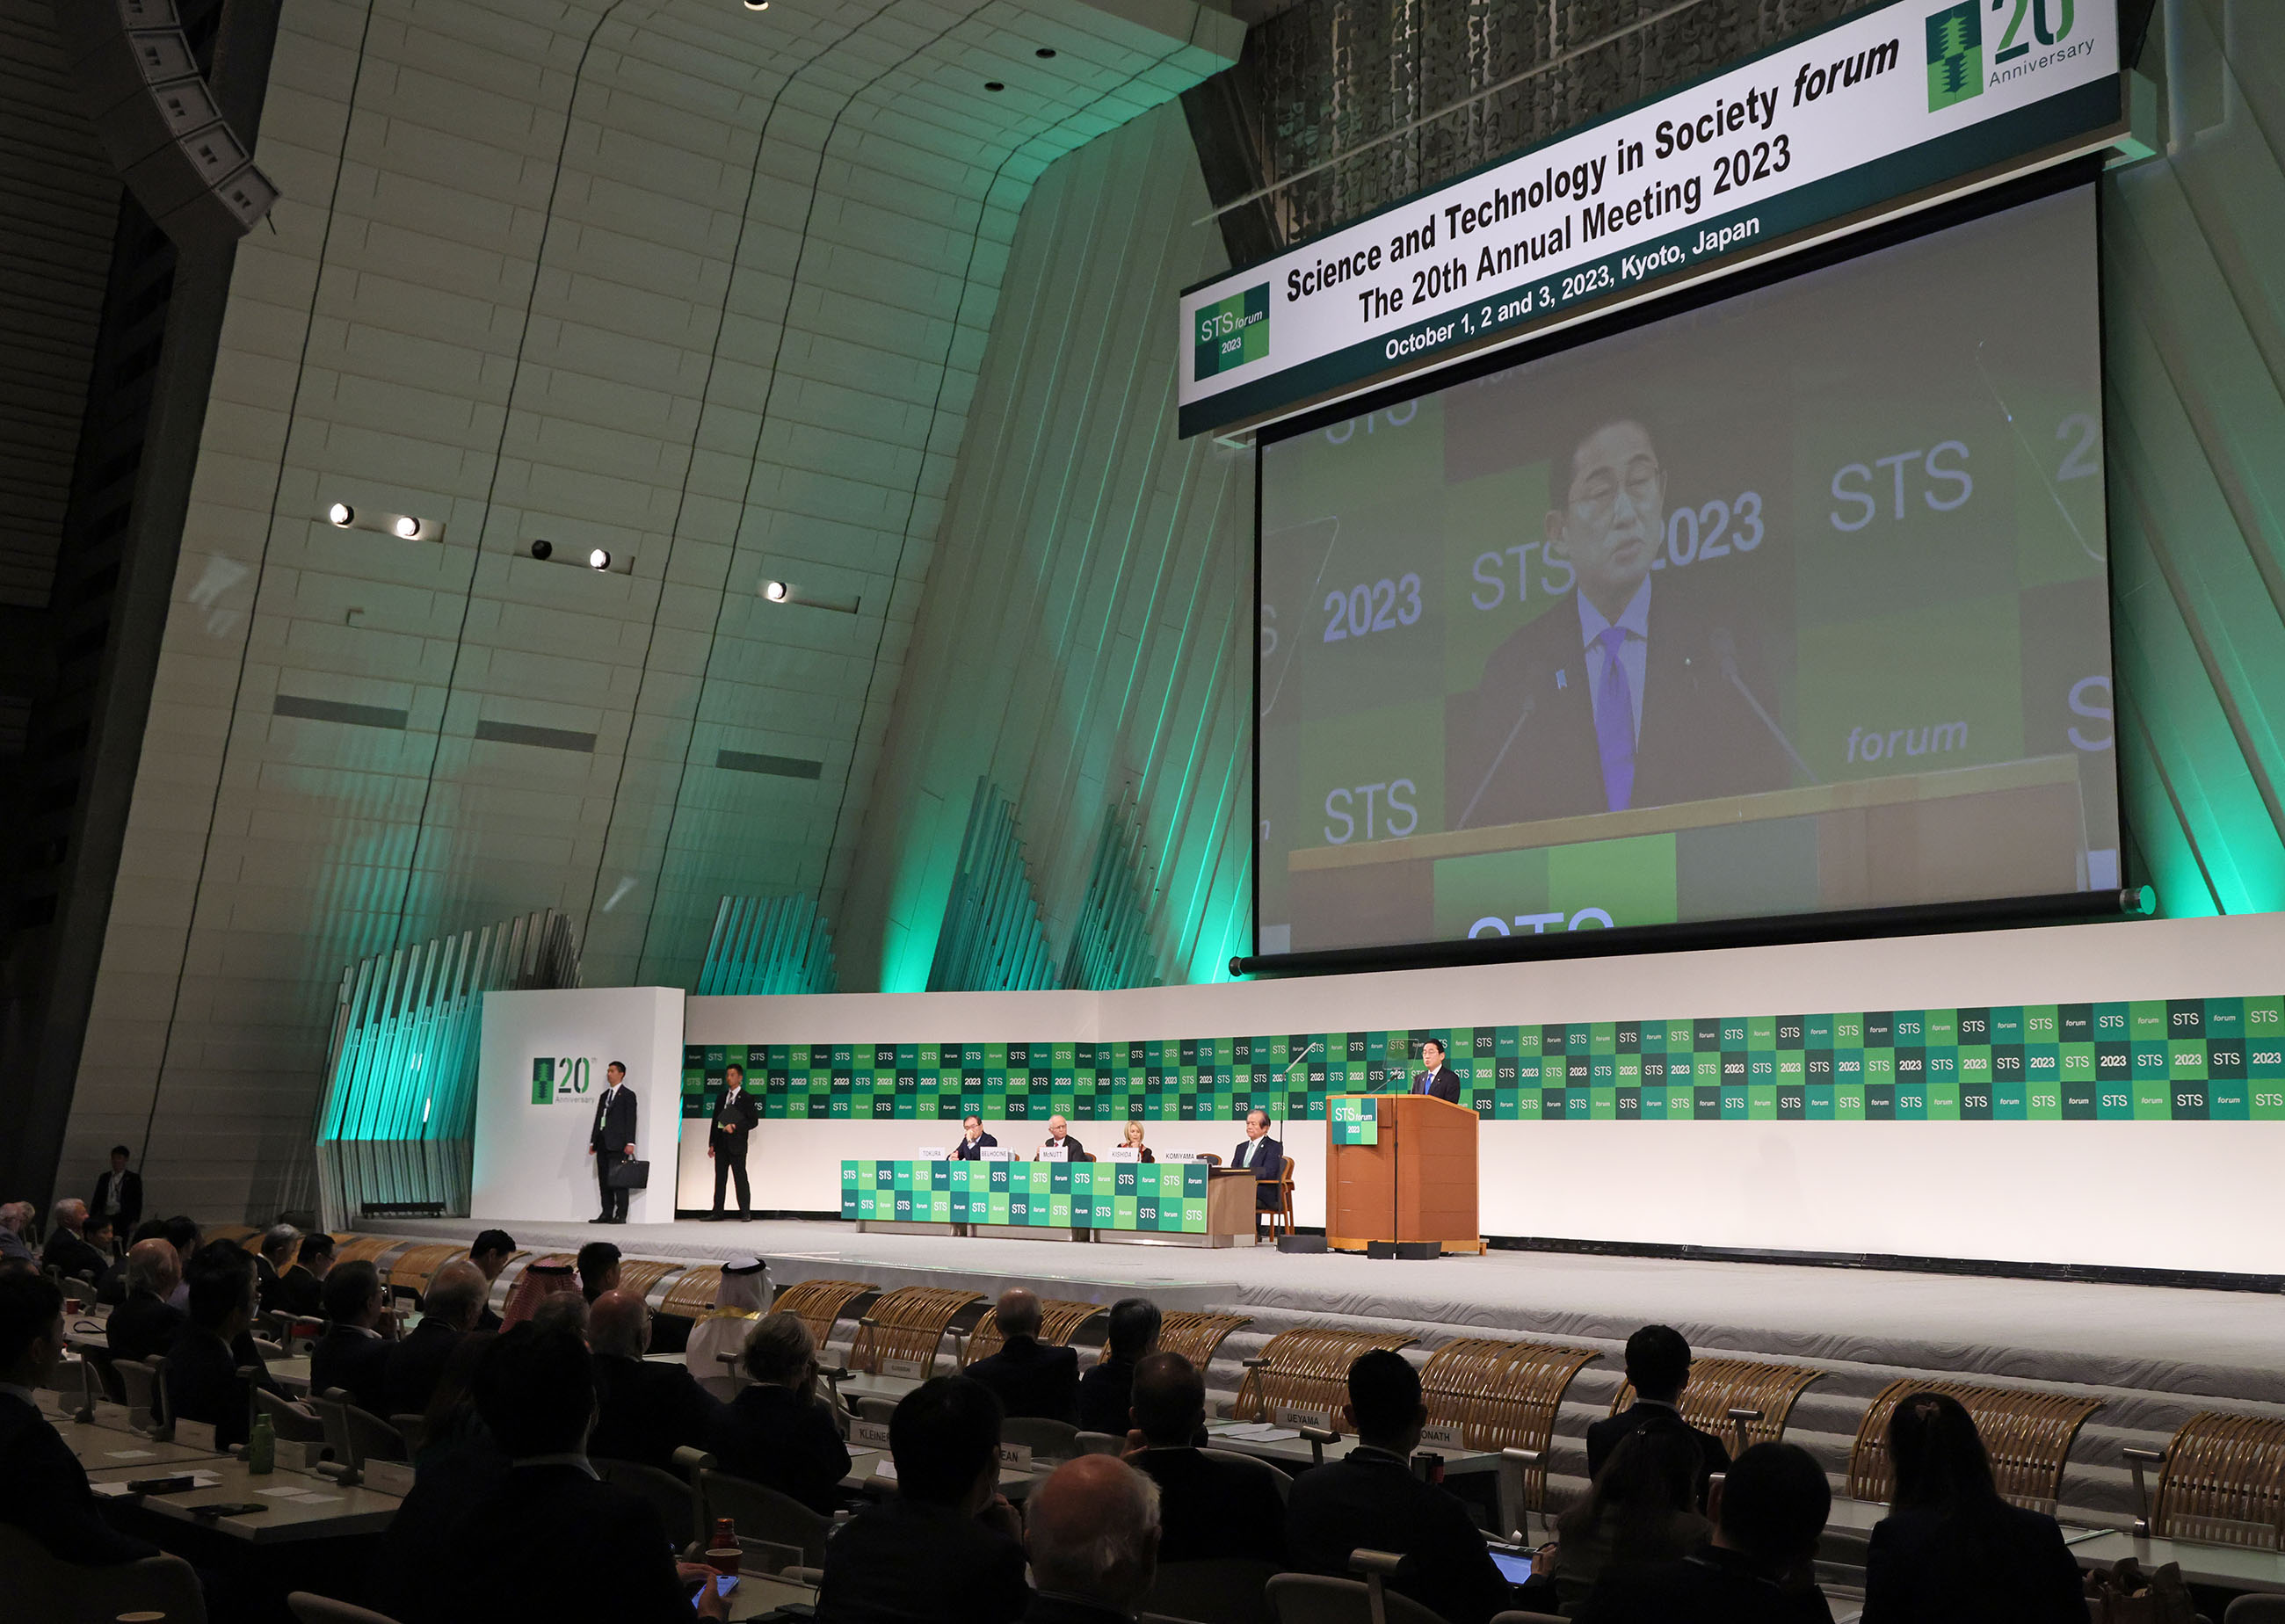 Prime Minister Kishida delivering an address at the opening ceremony (6)